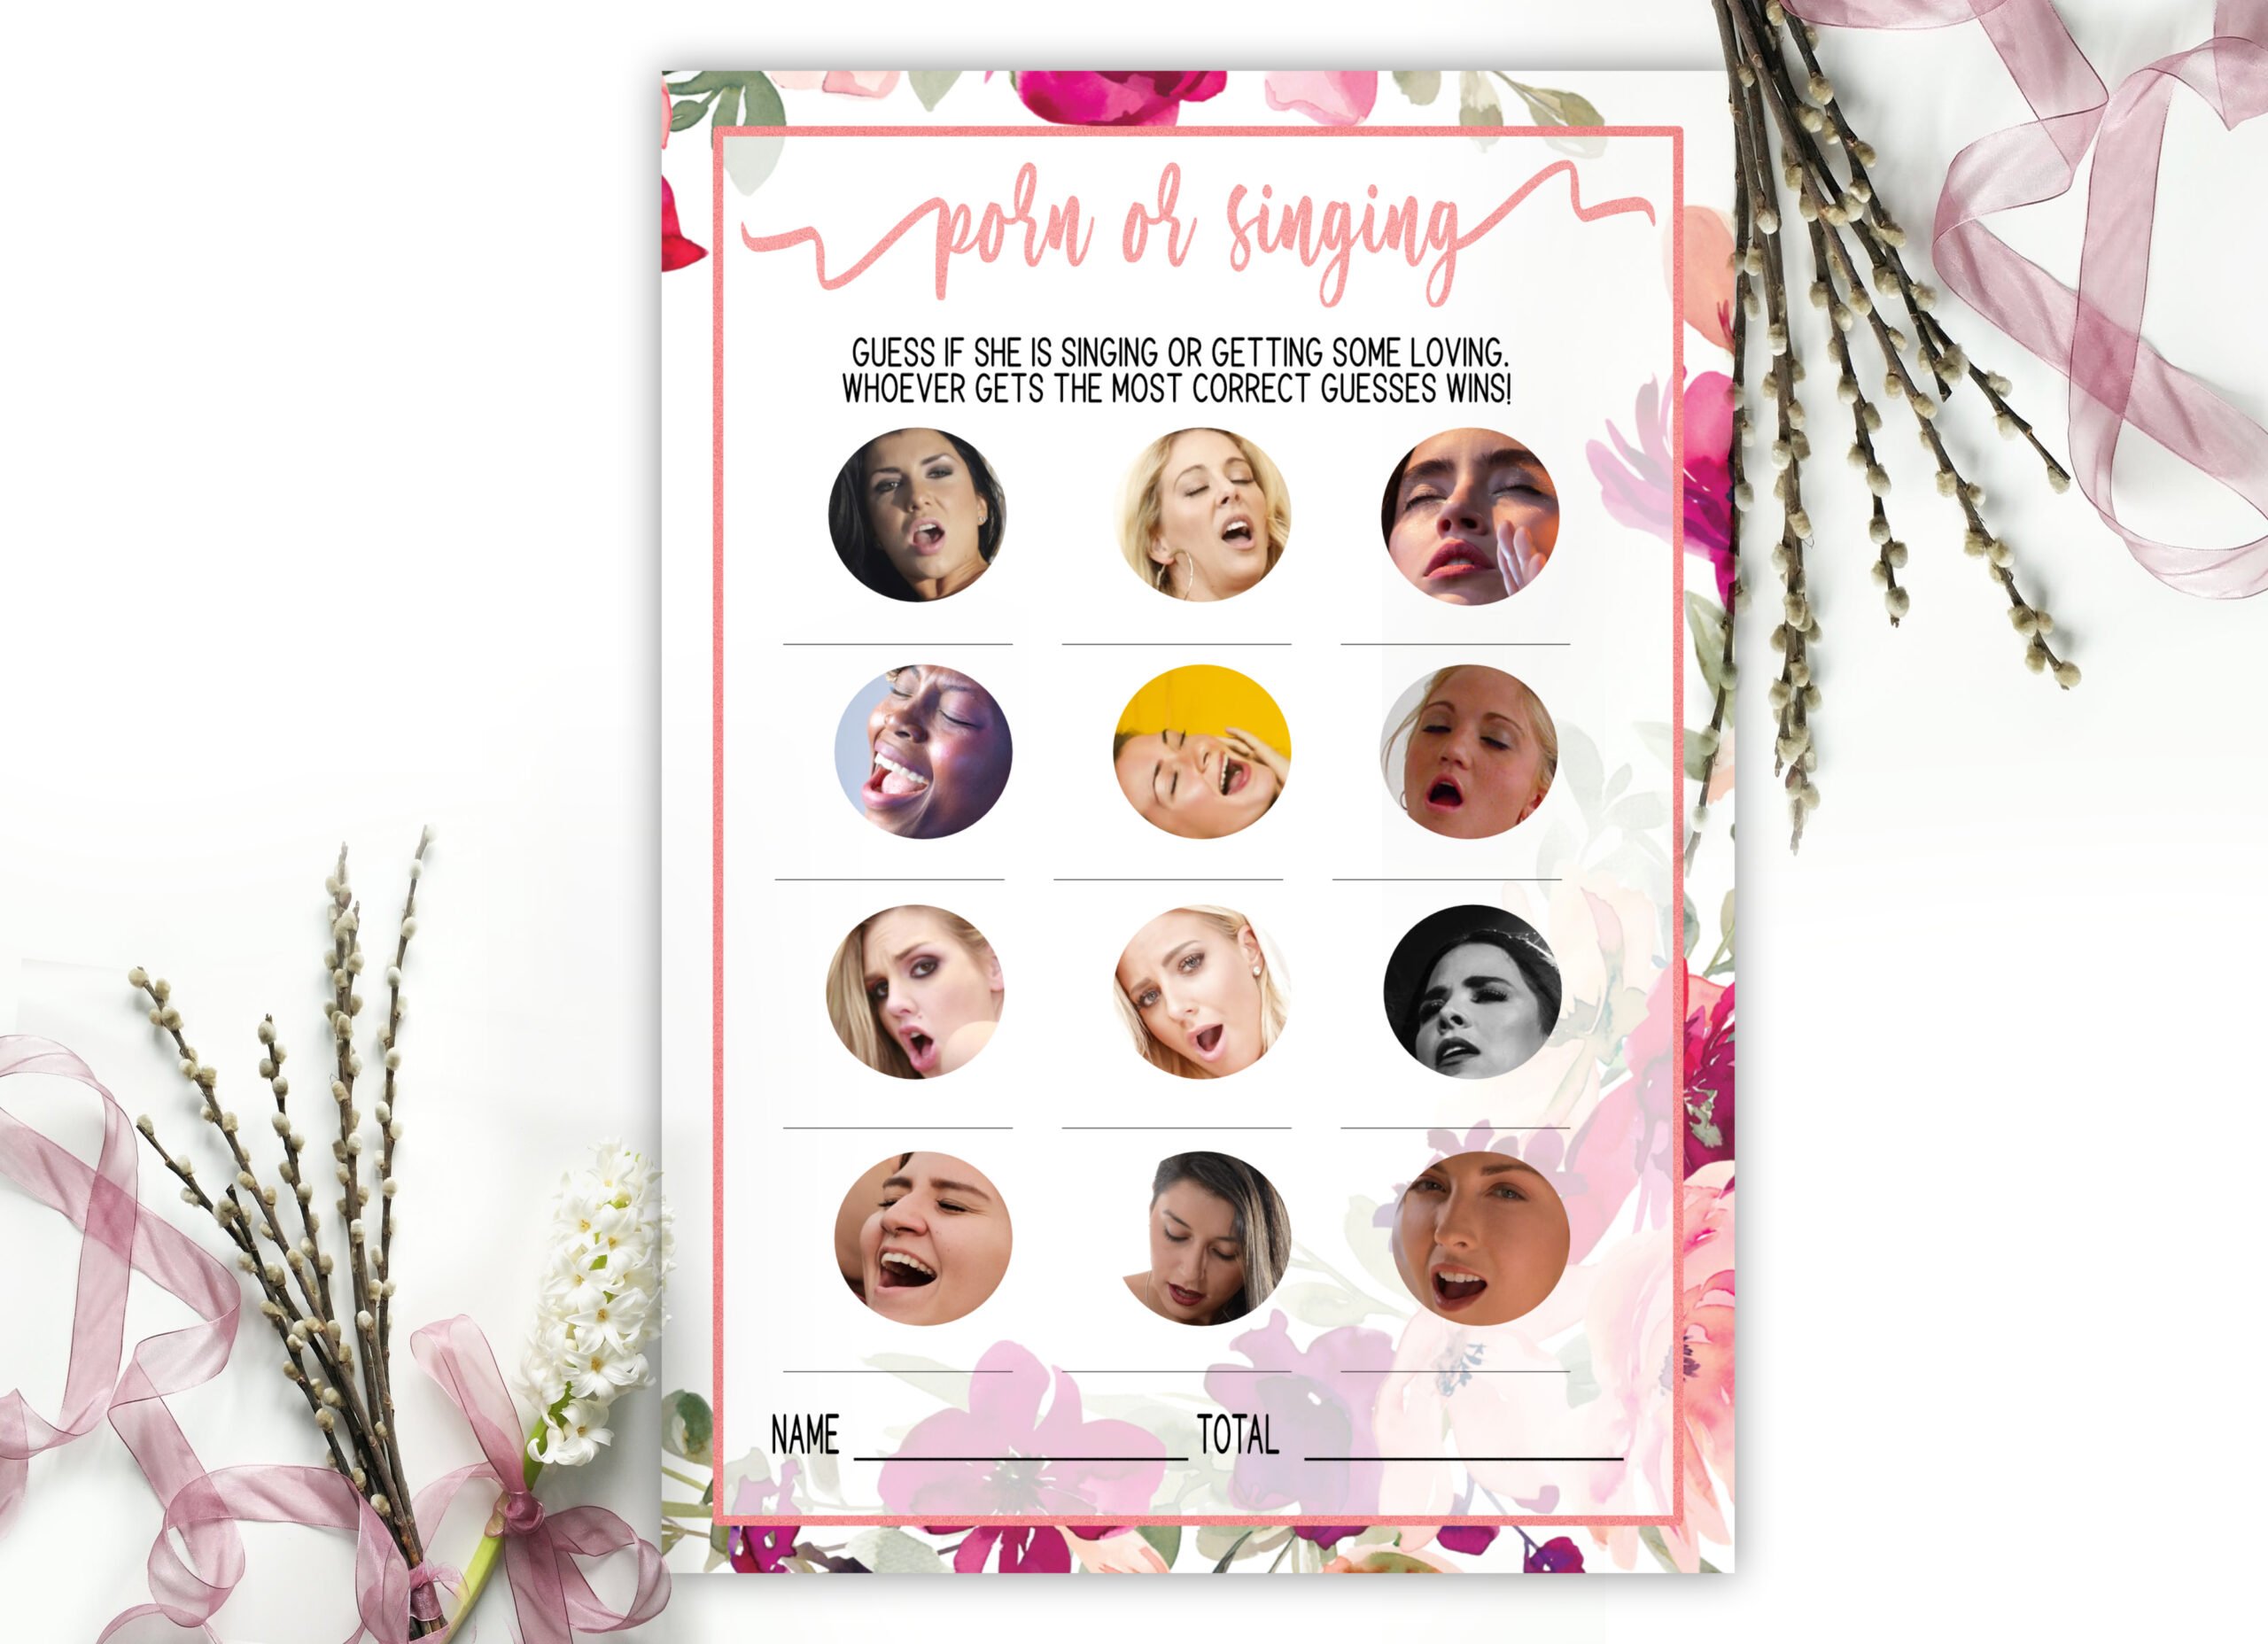 BACHELORETTE GAMES Porn or Singing Game Bachelorette Adult Party Game